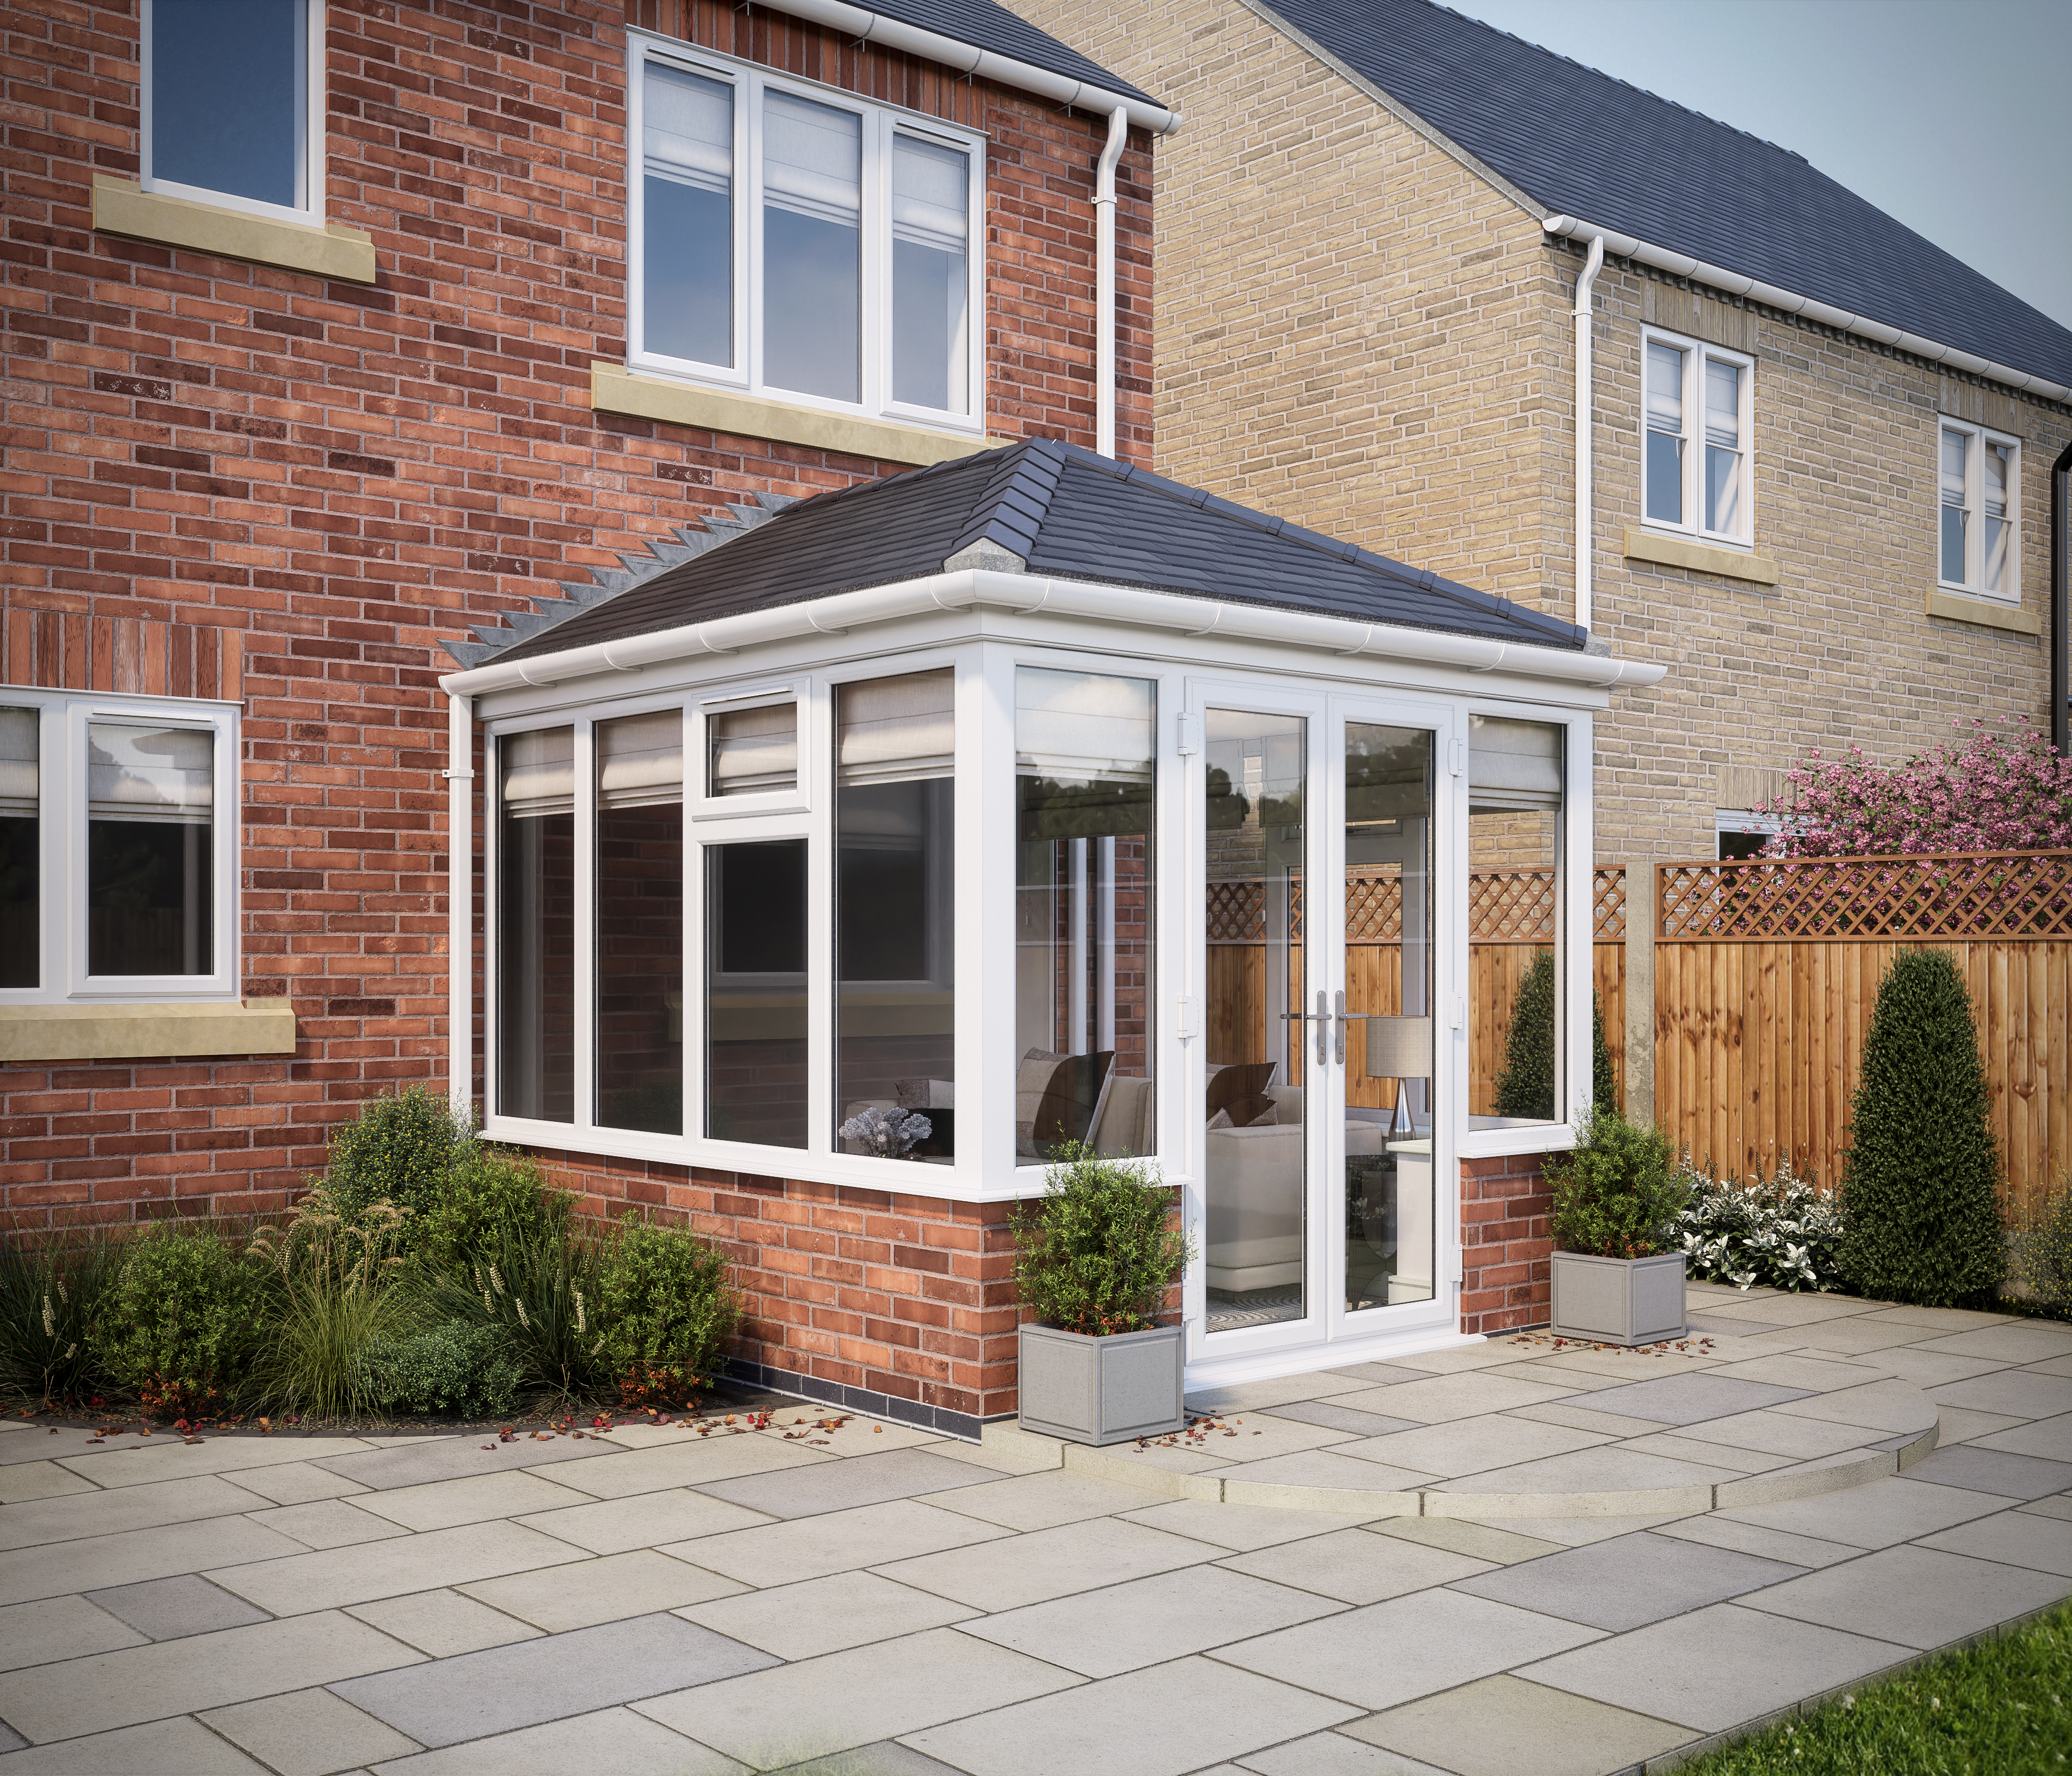 SOLid Roof Edwardian Conservatory White Frames Dwarf Wall with Titanium Grey Tiles - 13 x 13ft